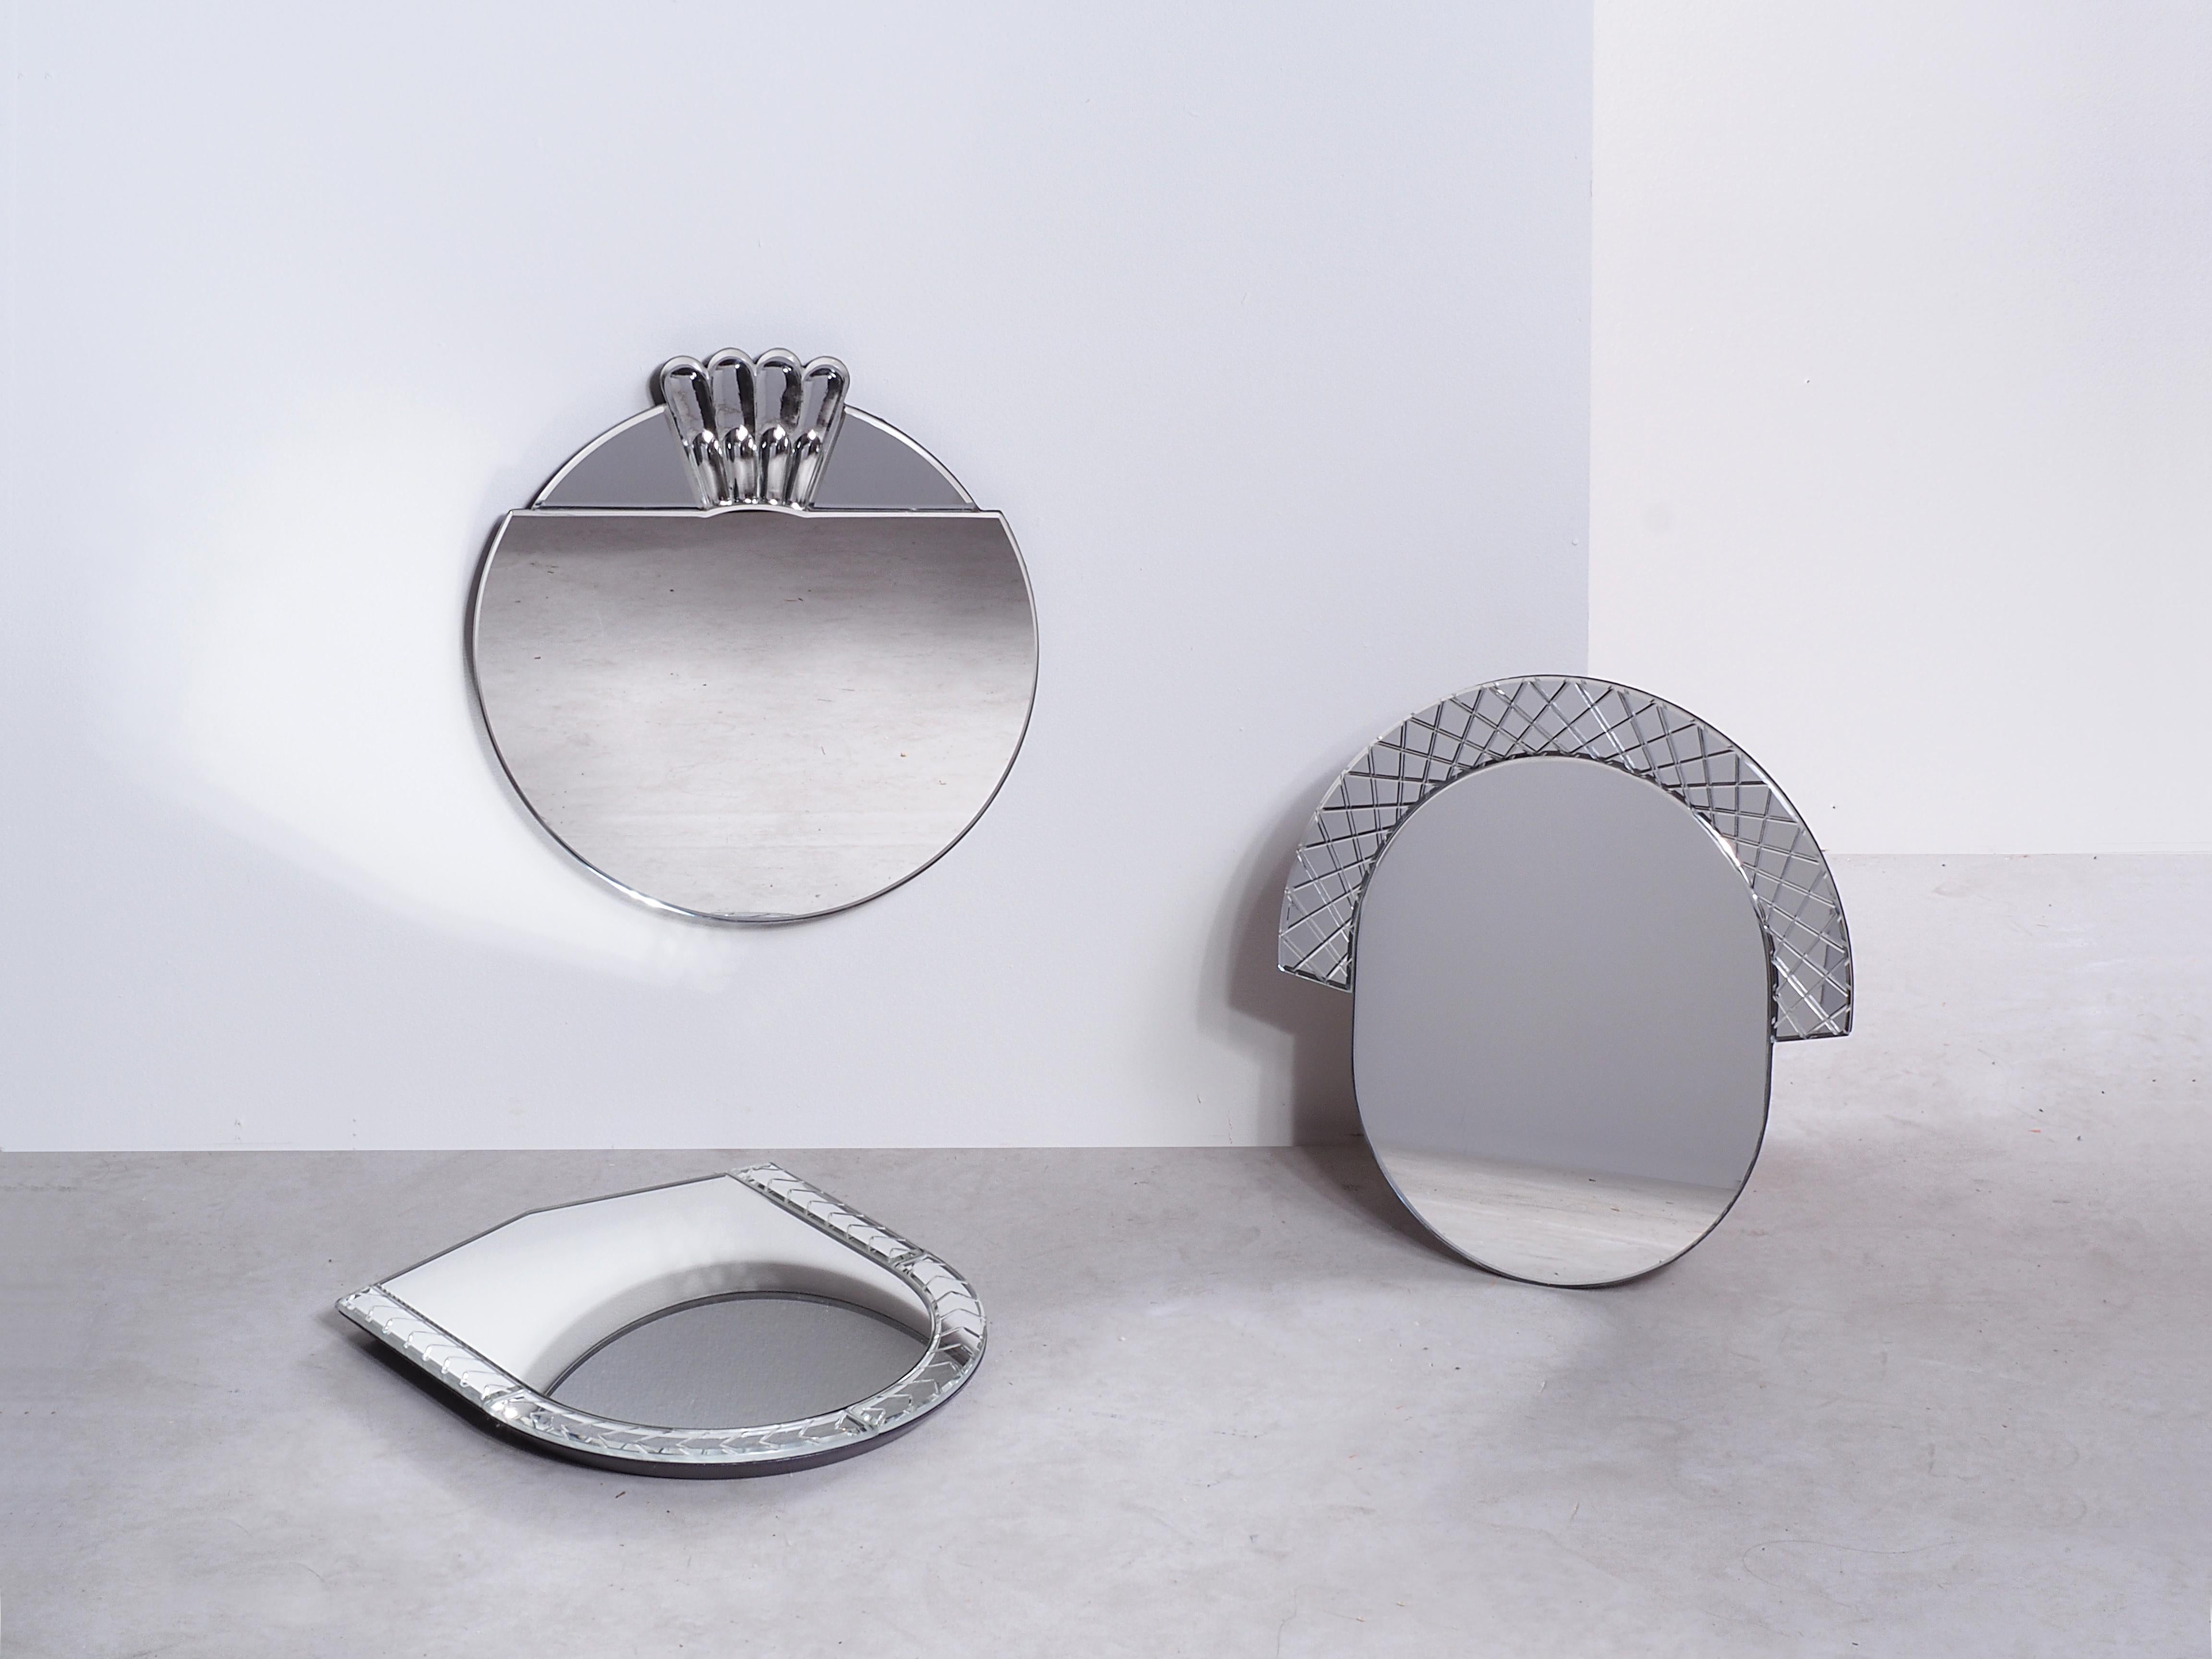 Set of 3 Small Scena Elemento Murano Mirrors by Nikolai Kotlarczyk
Dimensions: D 3 x W 30 x H 30 cm (each). 
Materials: silvered carved glass, dark gray wood back.
Also available in other designs and dimensions. Please contact us for more